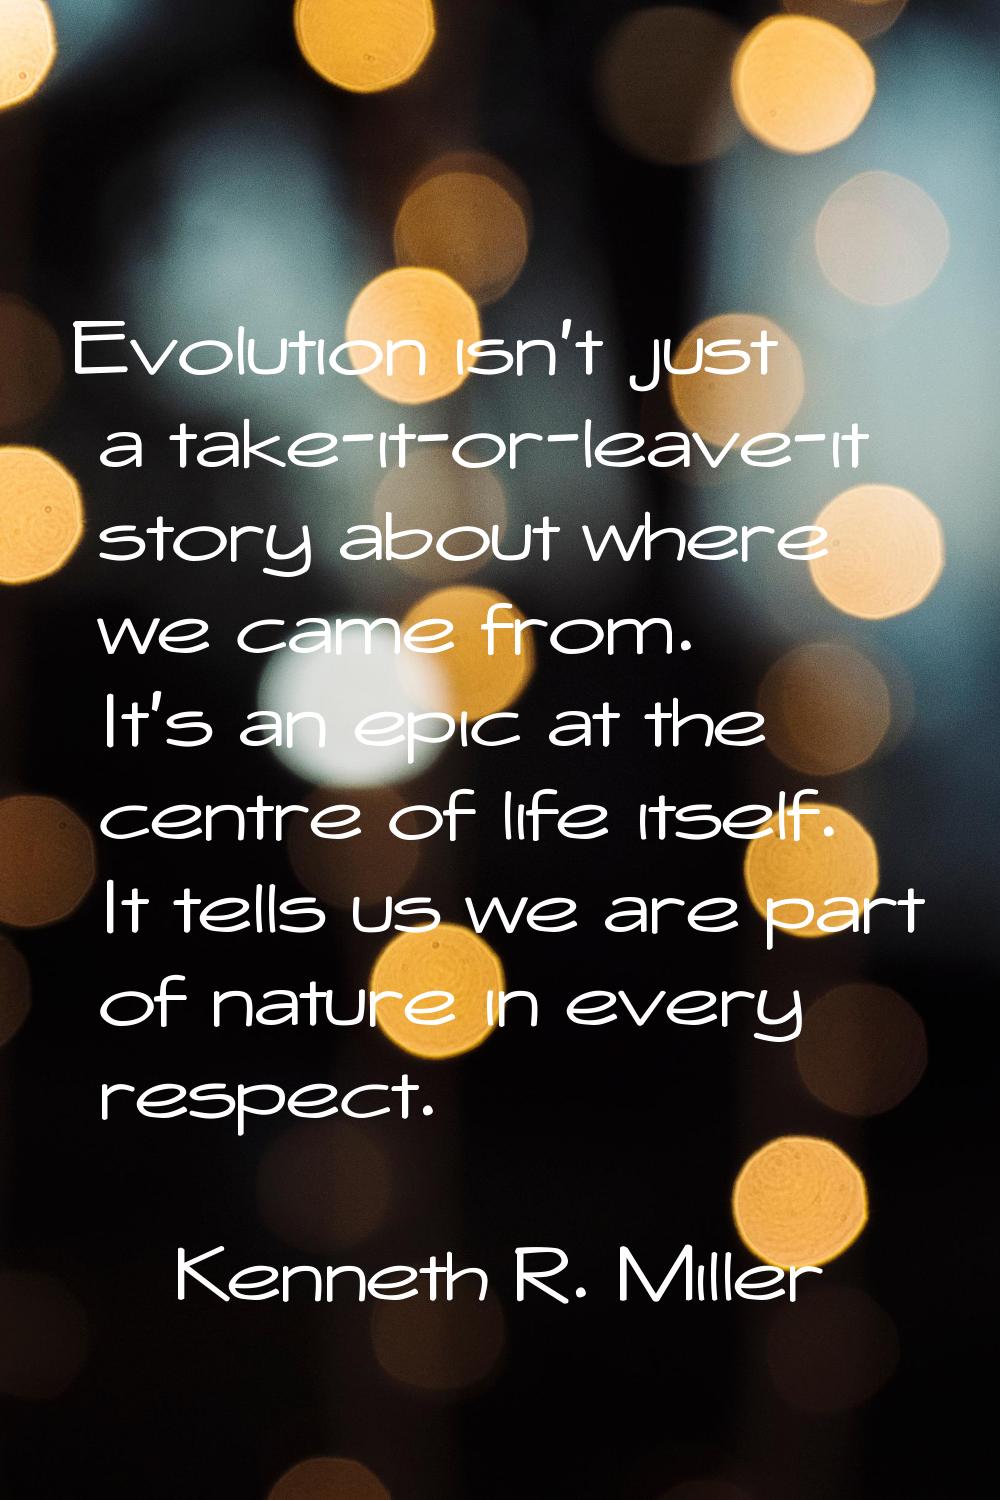 Evolution isn't just a take-it-or-leave-it story about where we came from. It's an epic at the cent